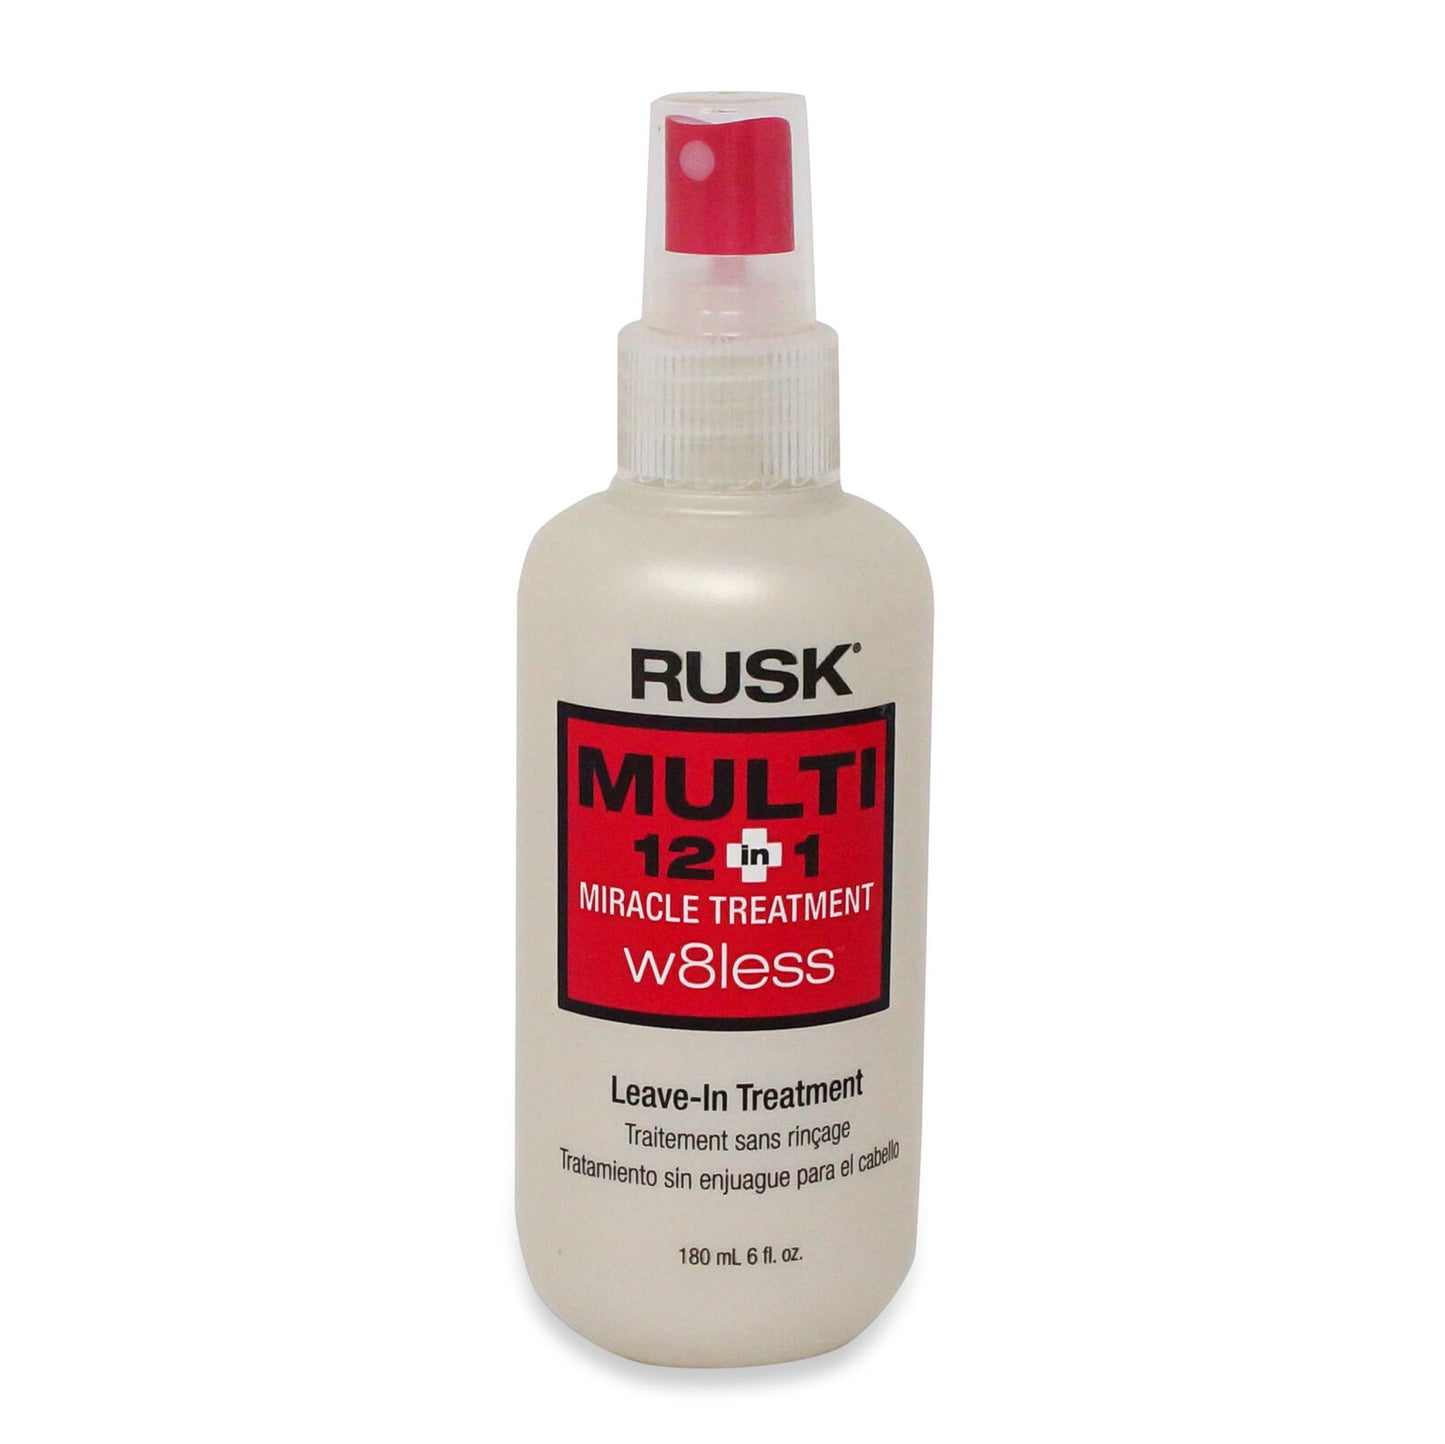 RUSK W8less Multi 12-in-1 Miracle Leave-In Treatment